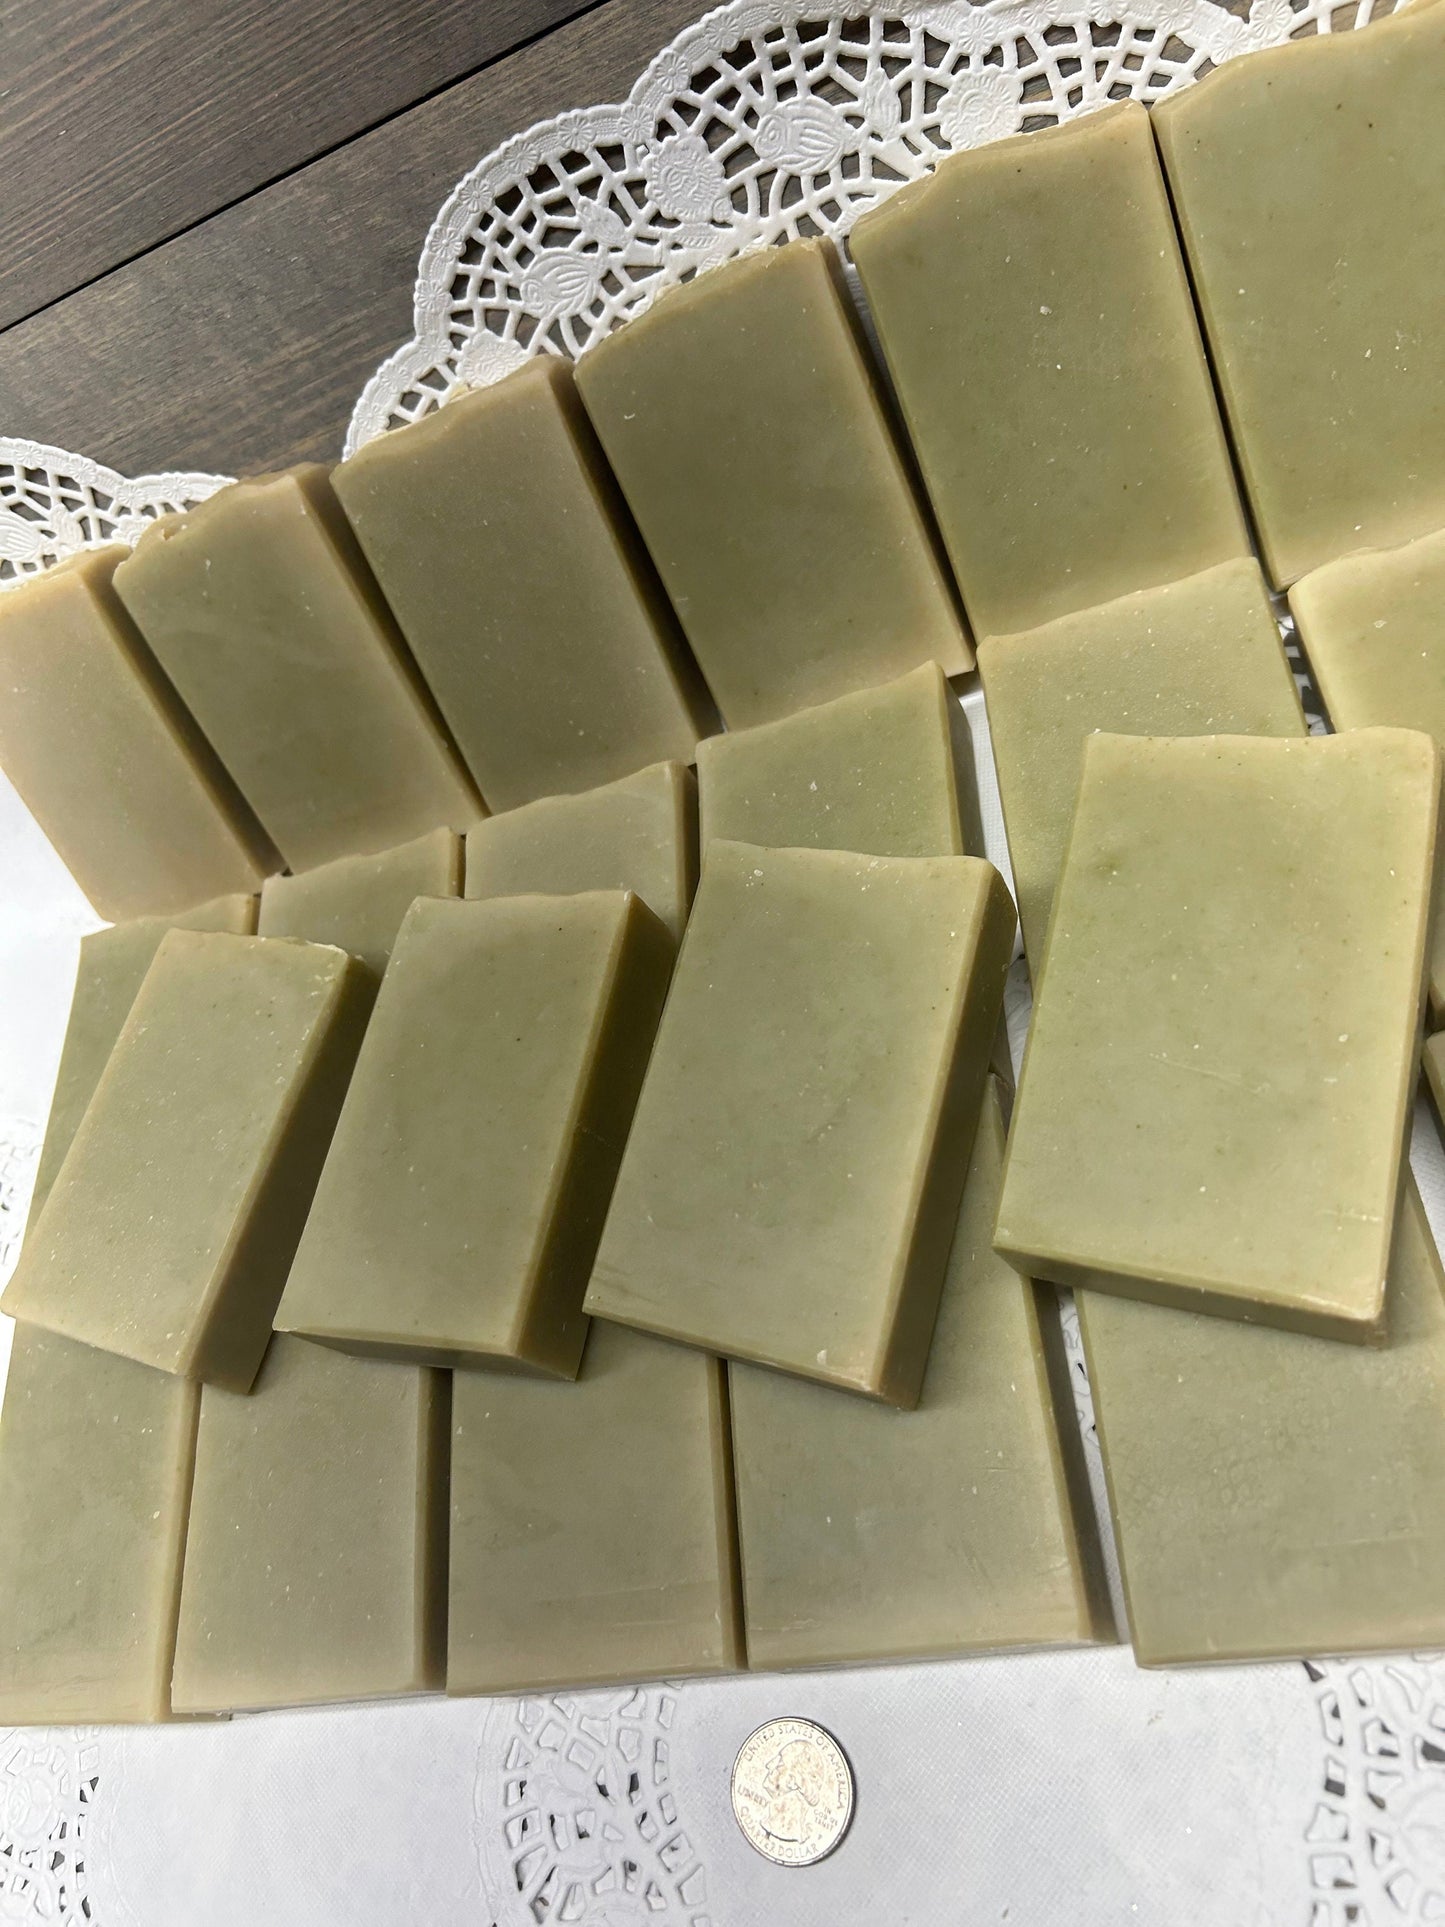 Aloe Vera and Cucumber Soap, Natural Color with Spirulina, Lovely lather